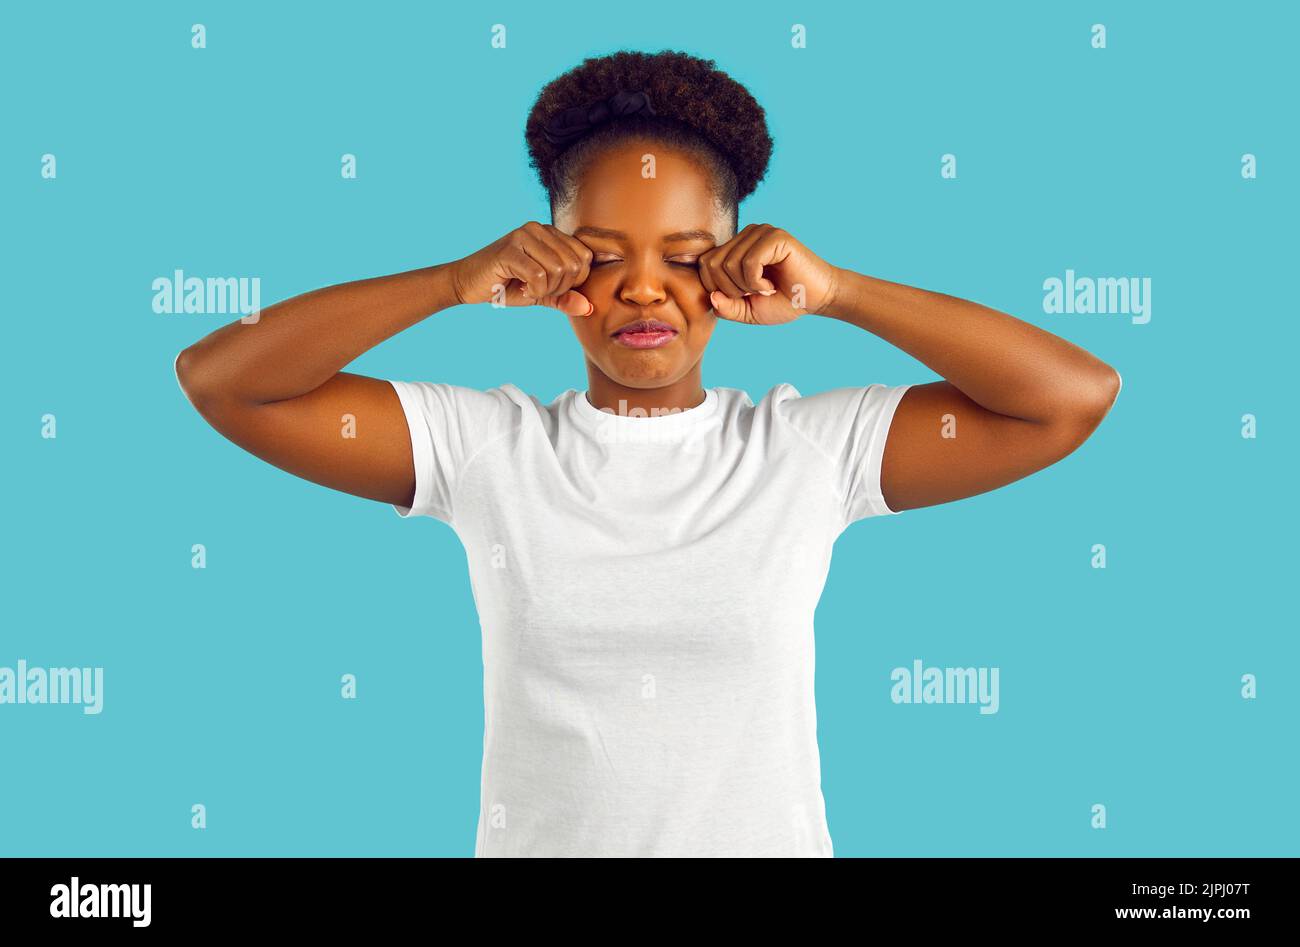 Funny capricious young african american woman pretending to cry against light blue background. Stock Photo